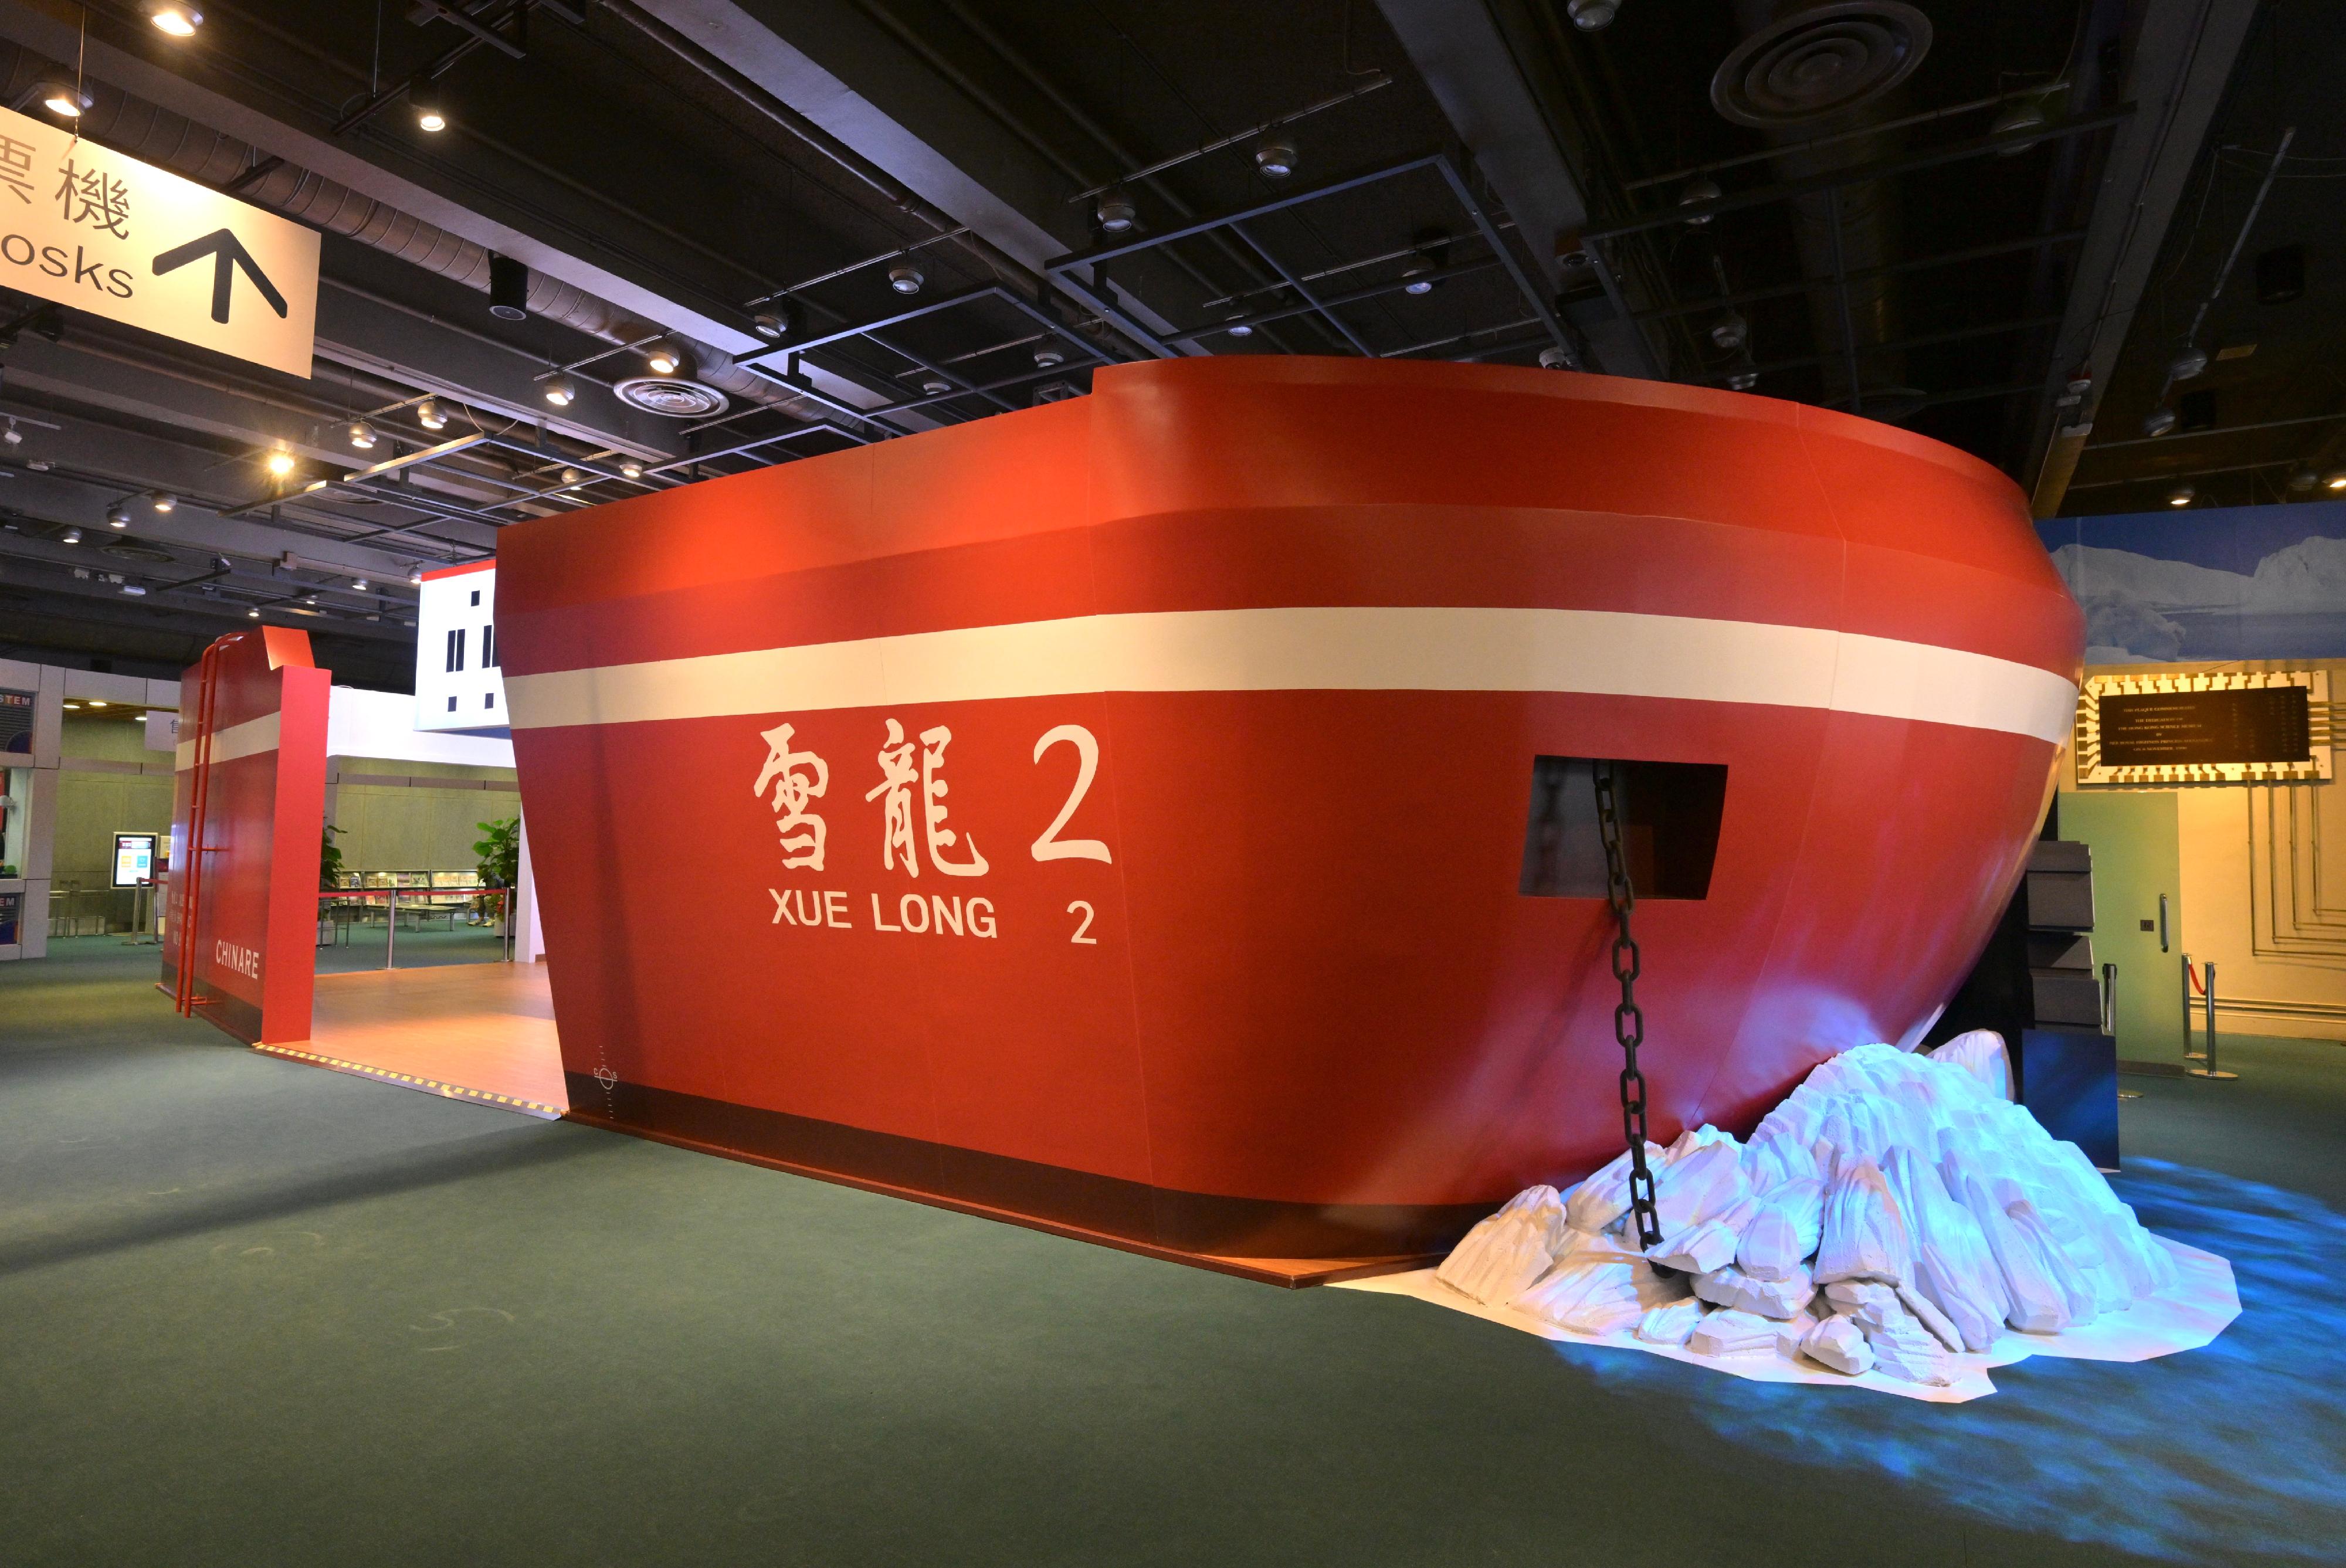 The Hong Kong Science Museum launched a new special exhibition, "Polar Research and Climate Change", today (March 18). Photo shows an exhibition area replicating the design of China's polar exploration icebreaker Xuelong 2, where visitors can feel as if they have boarded the vessel and learn about China's development of polar research.